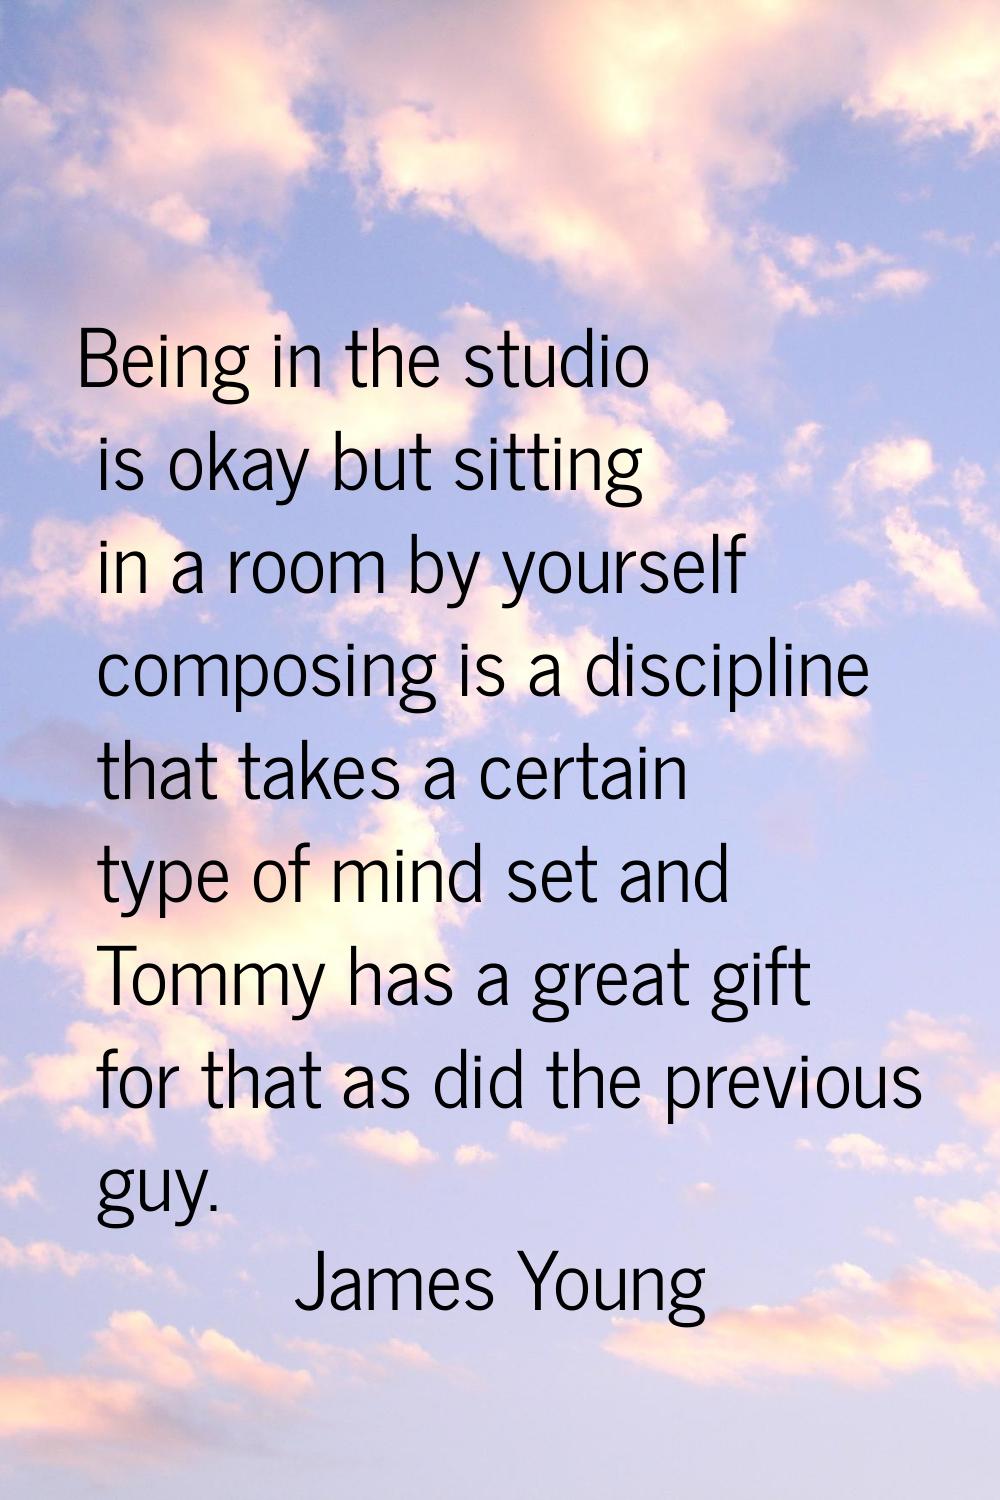 Being in the studio is okay but sitting in a room by yourself composing is a discipline that takes 